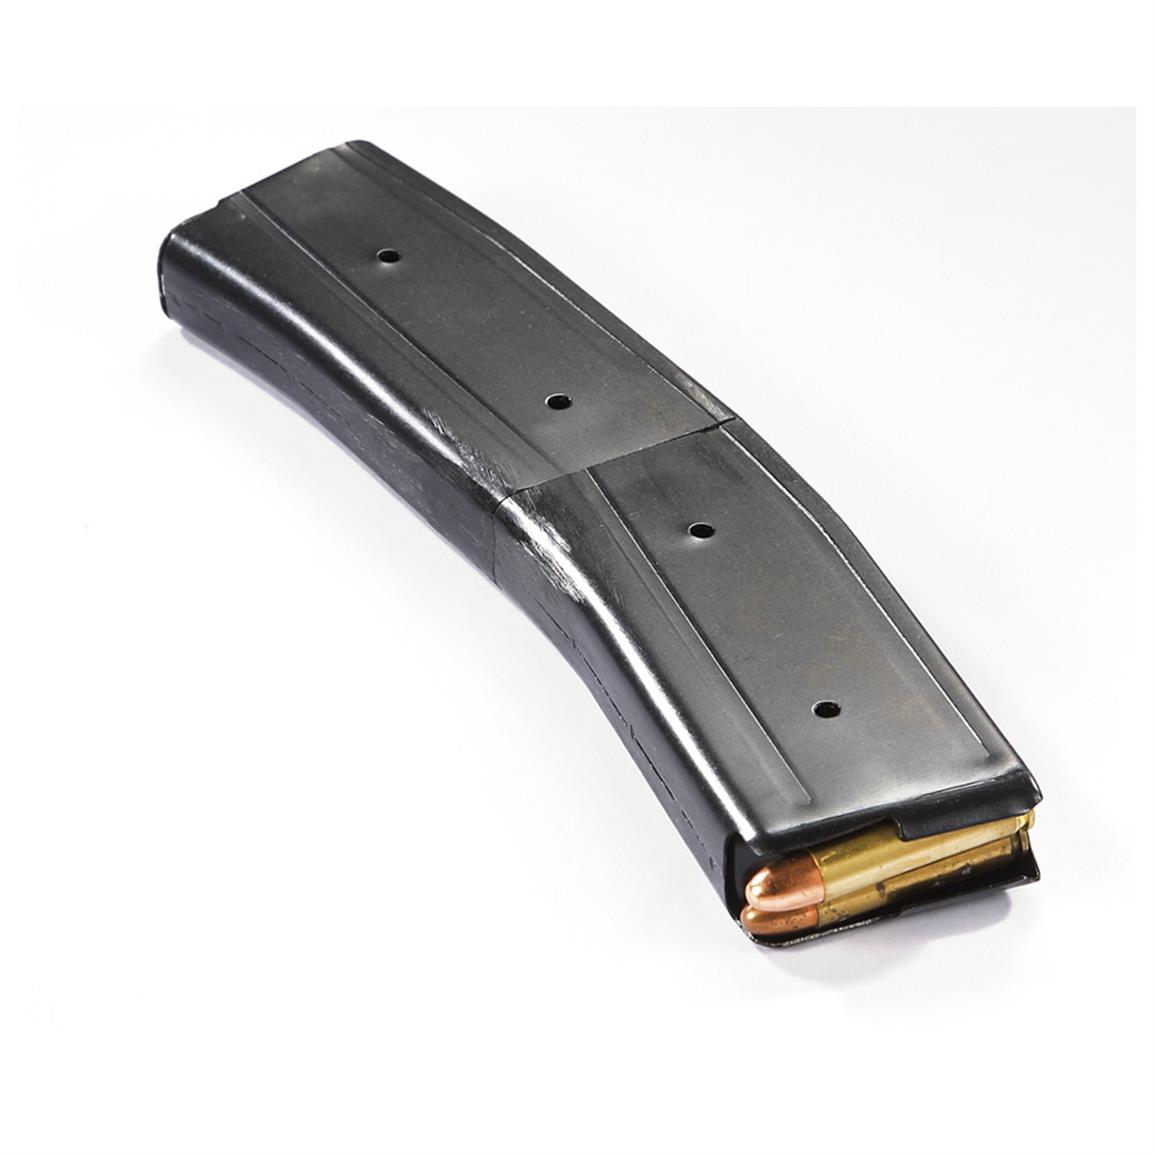 40 Rd M1 Carbine Mag 69401 Rifle Mags At Sportsmans Guide